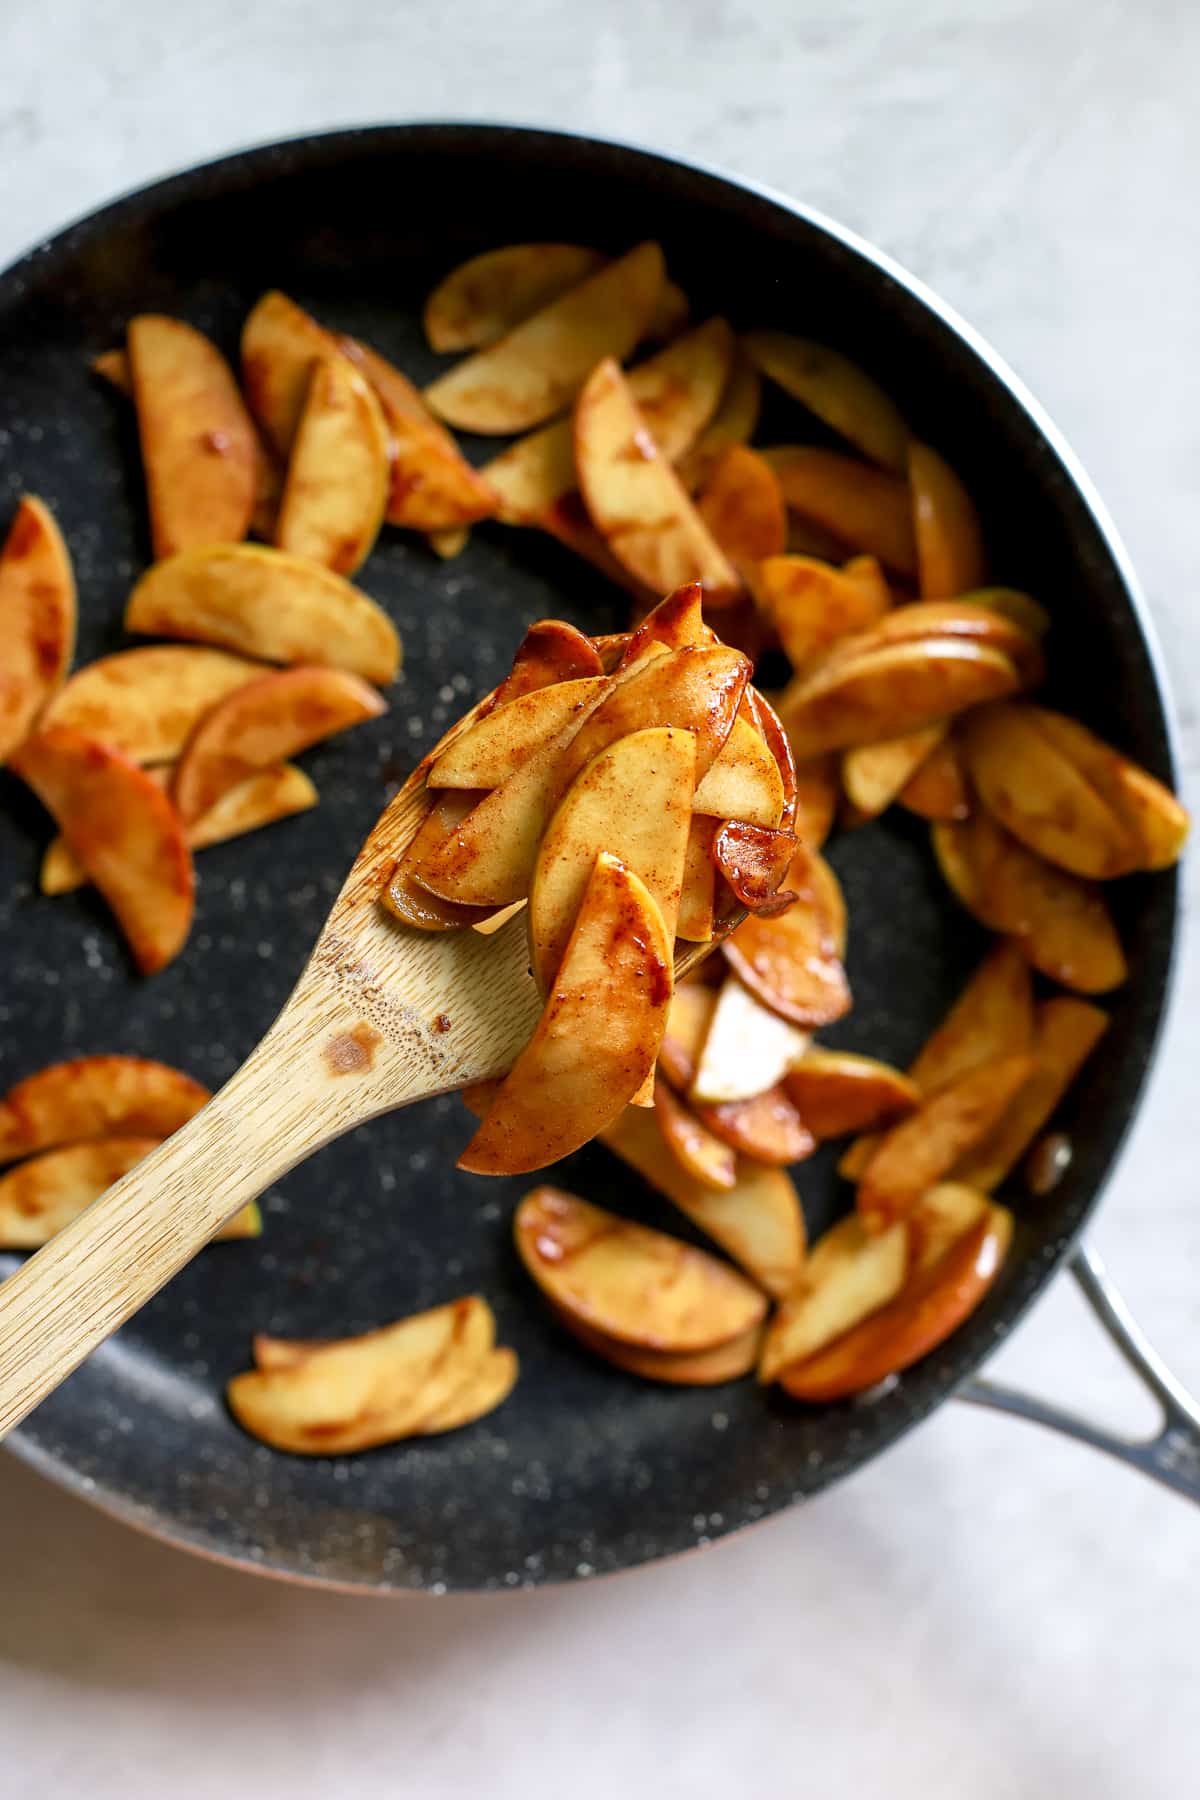 Wooden spoon full of simple sautéed apples, above sauté pan with more apples.